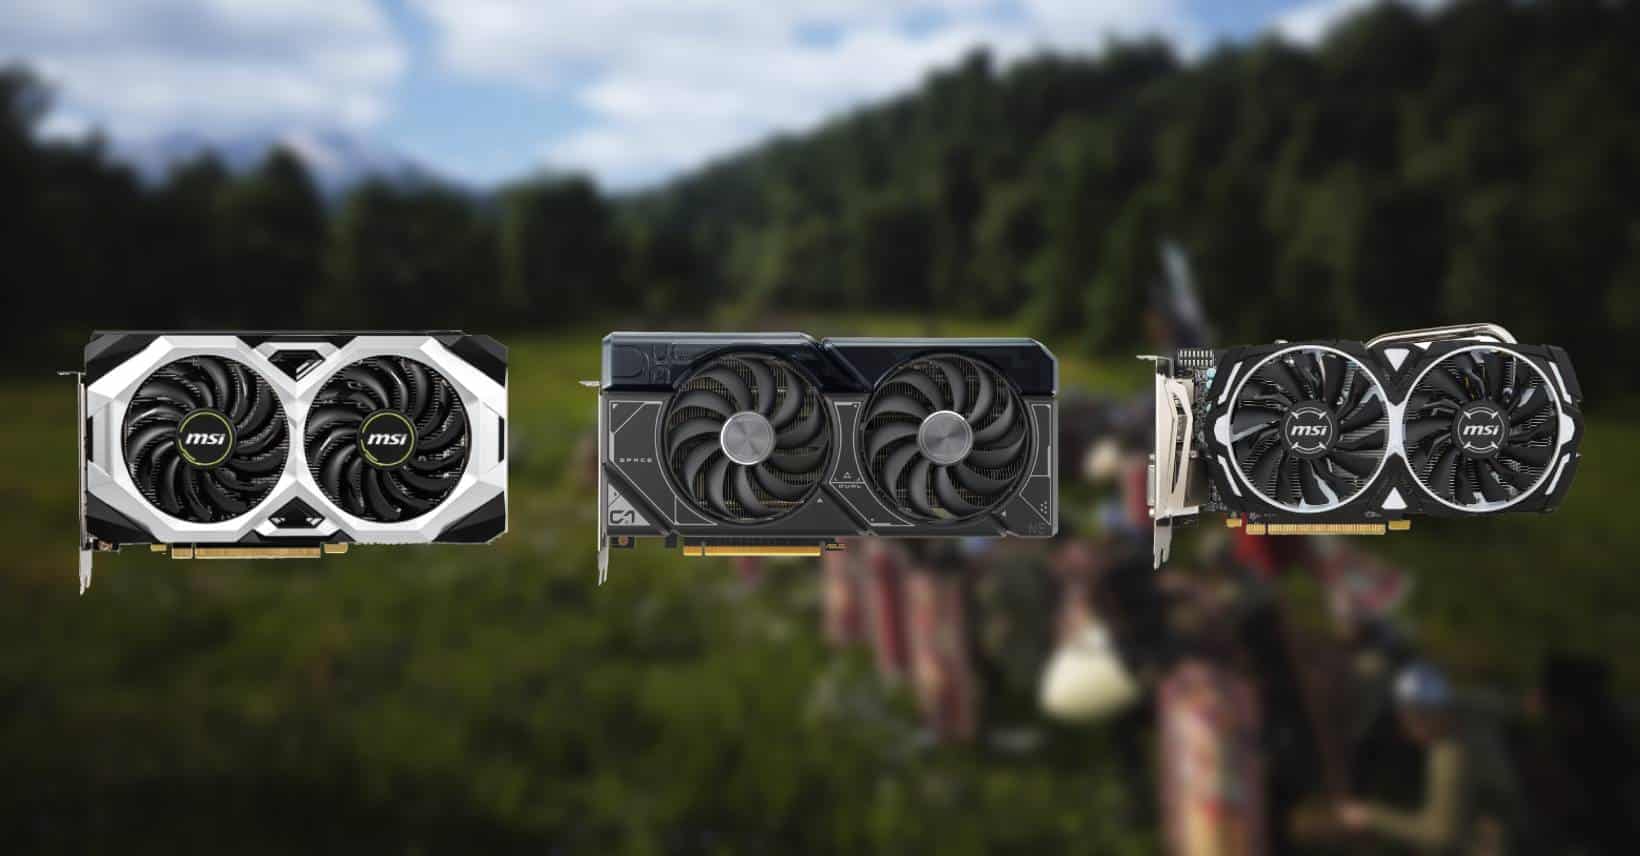 Three different models of the best GPU for Manor Lords 2024, MSI graphics cards, displayed in front of a blurred natural background.